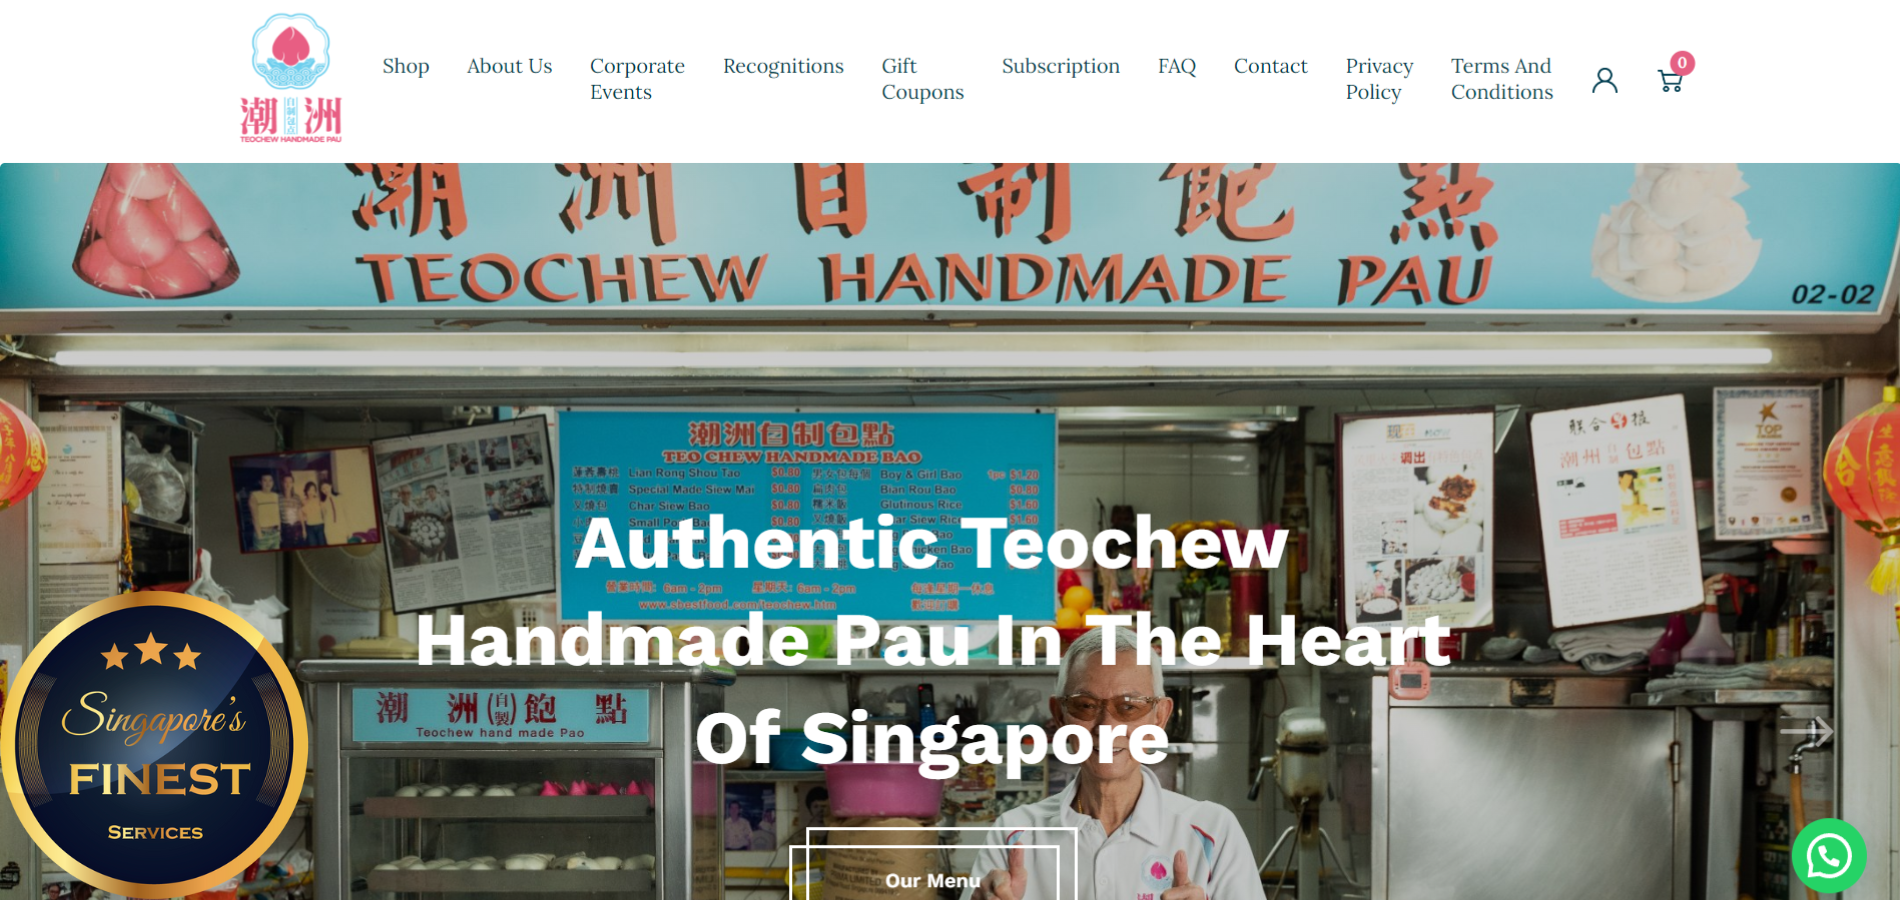 The Finest Toa Payoh Foods in Singapore